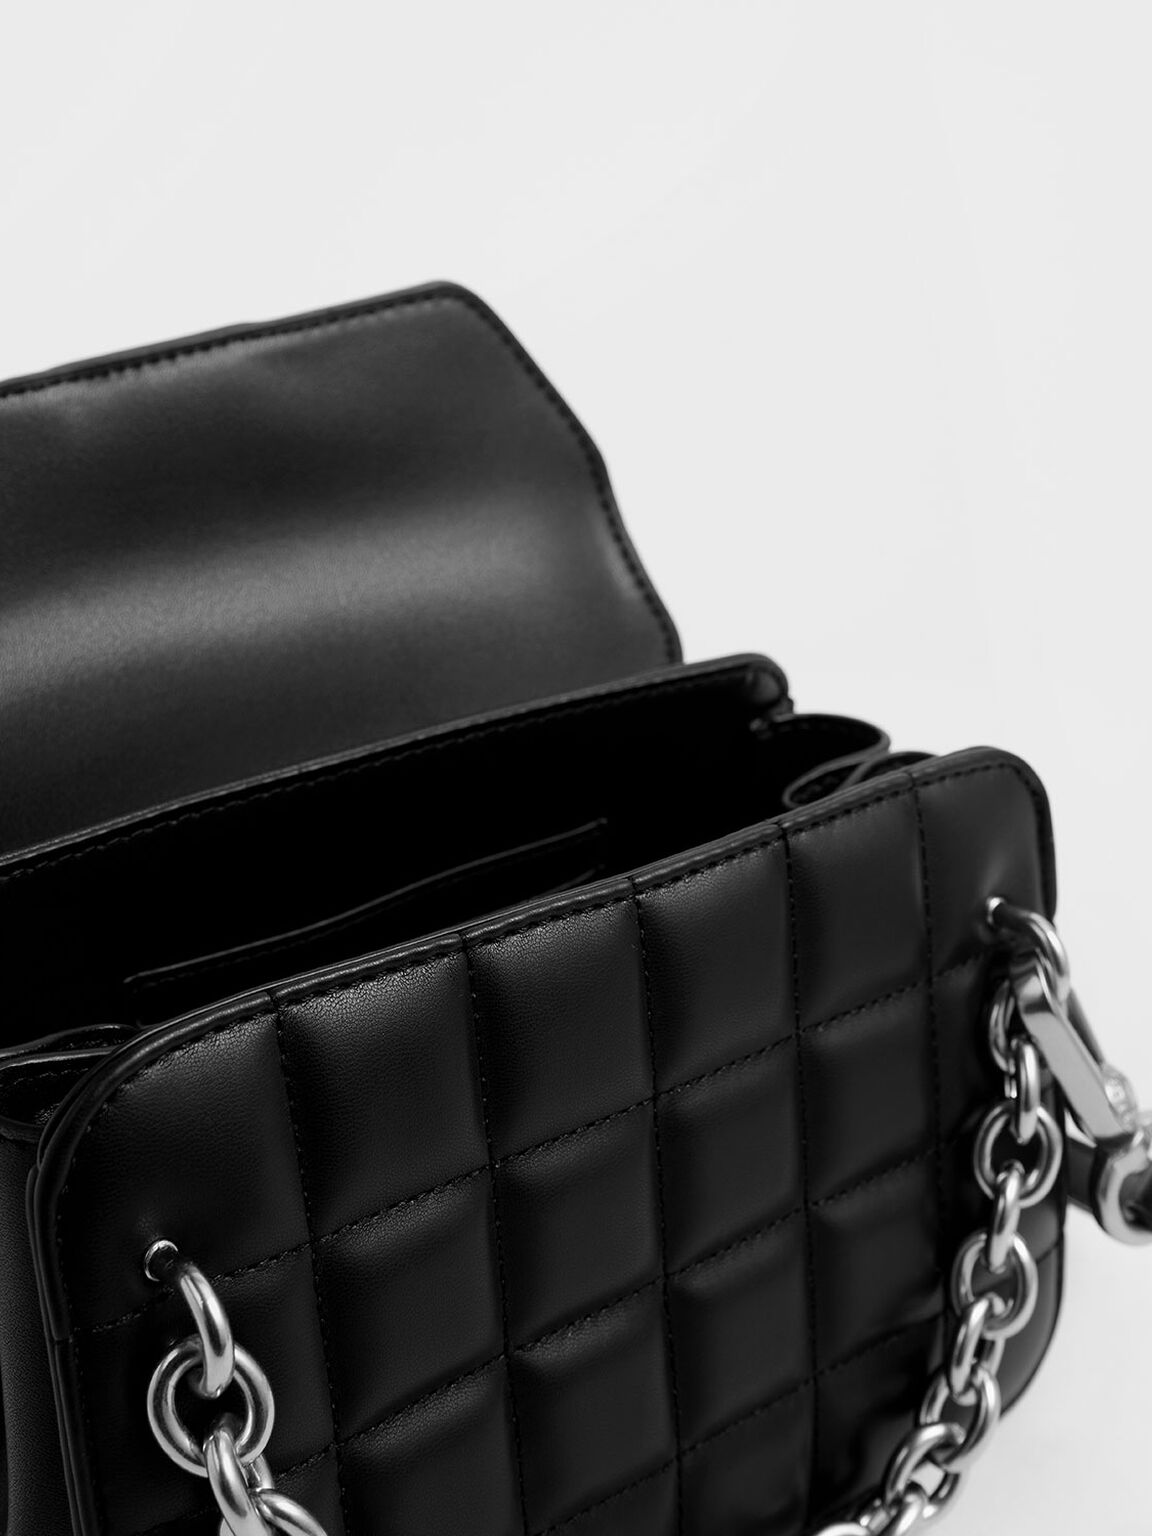 Black Chunky Chain Strap Quilted Shoulder Bag | CHARLES & KEITH US